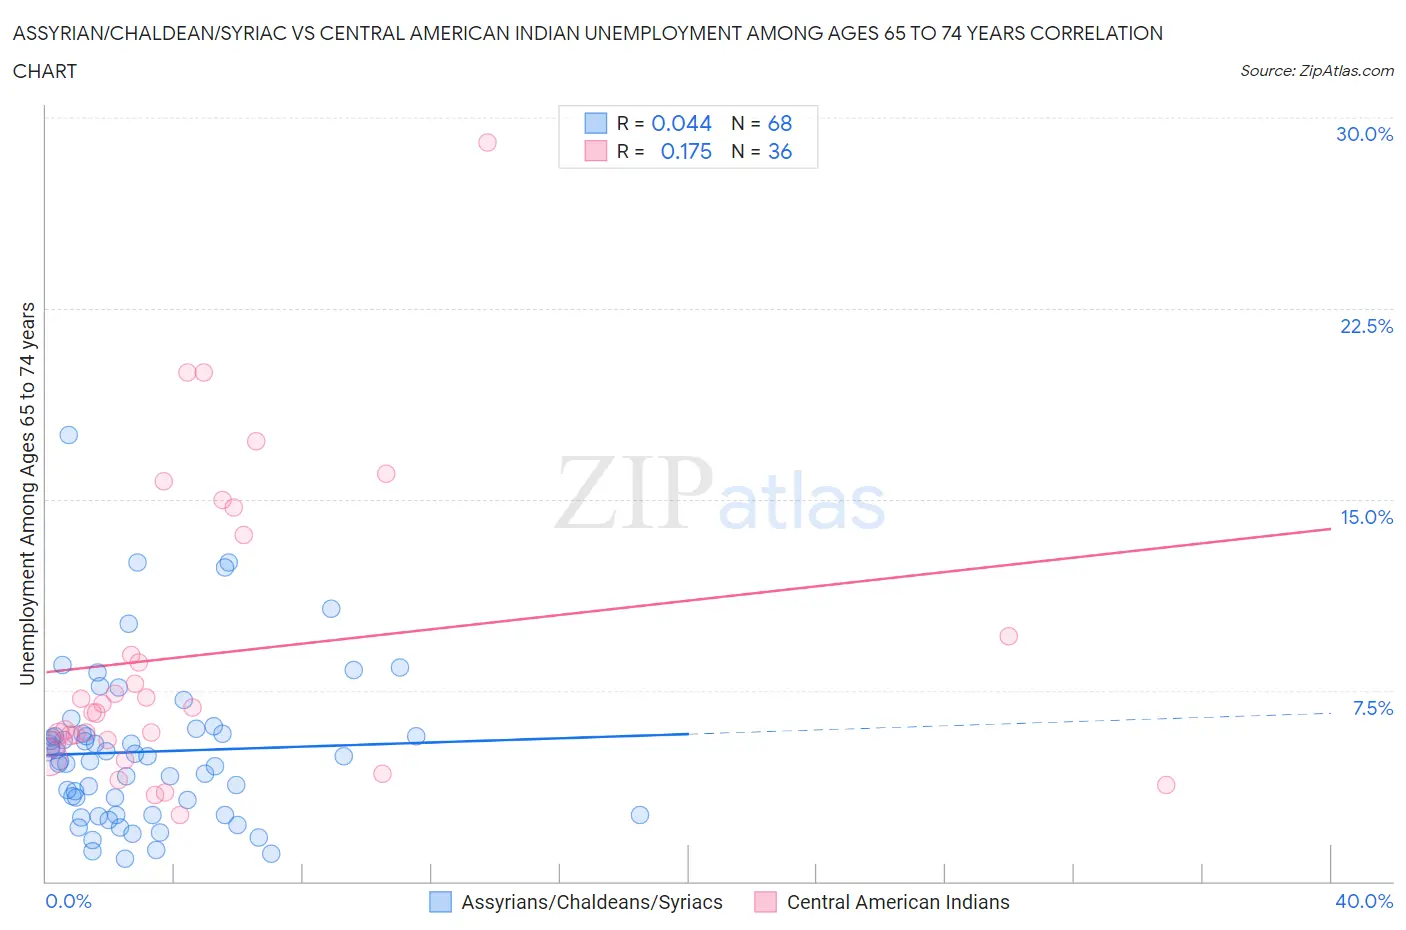 Assyrian/Chaldean/Syriac vs Central American Indian Unemployment Among Ages 65 to 74 years